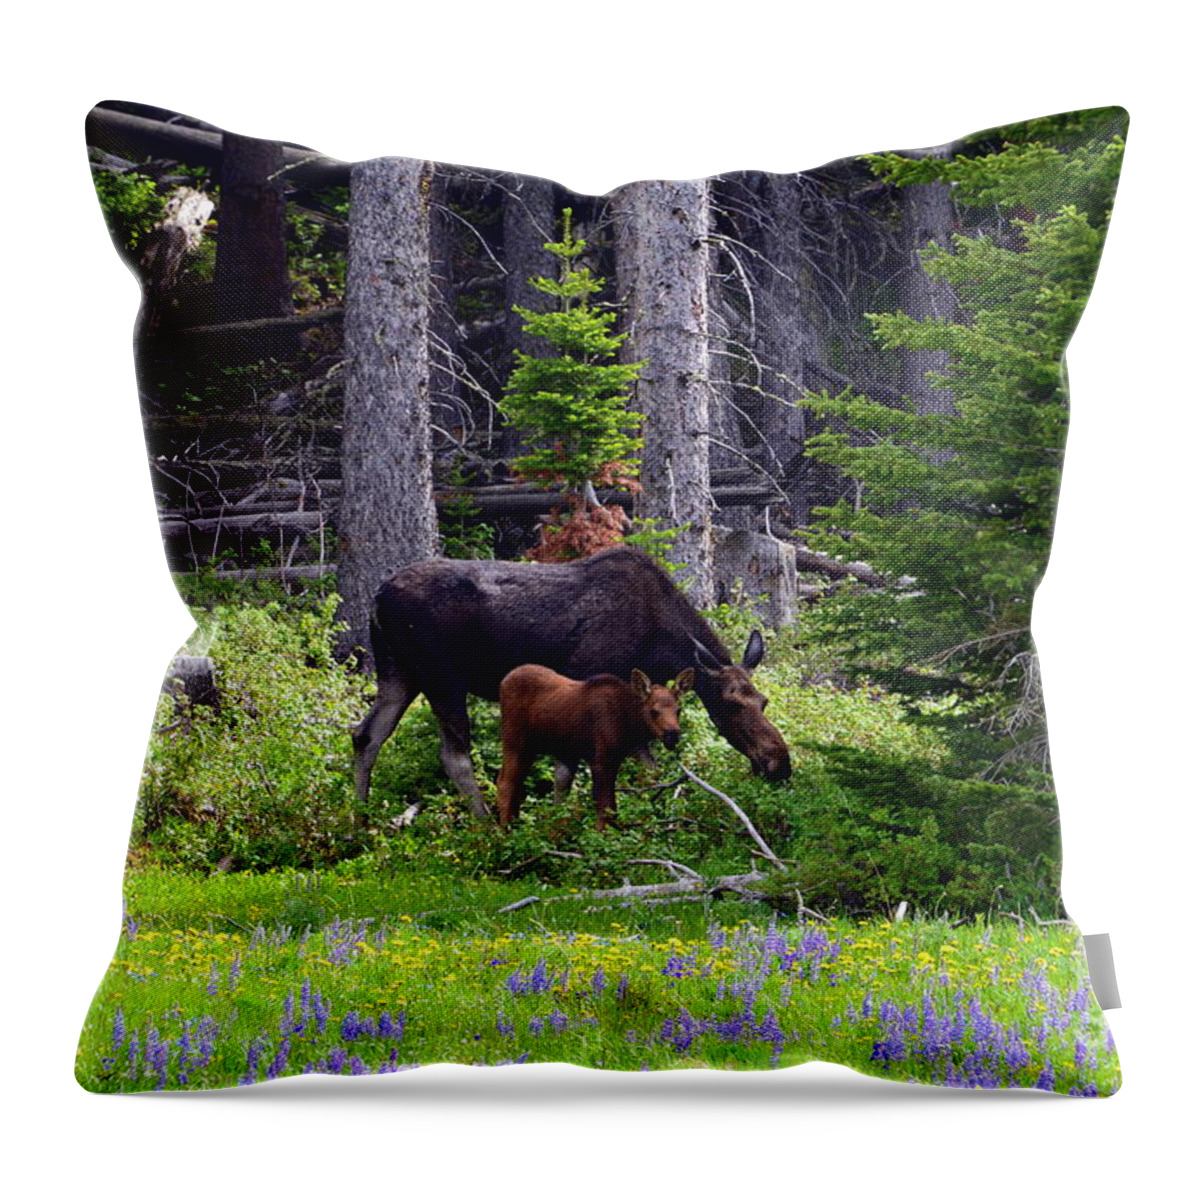 Moose Throw Pillow featuring the photograph Mom and Baby by Dorrene BrownButterfield